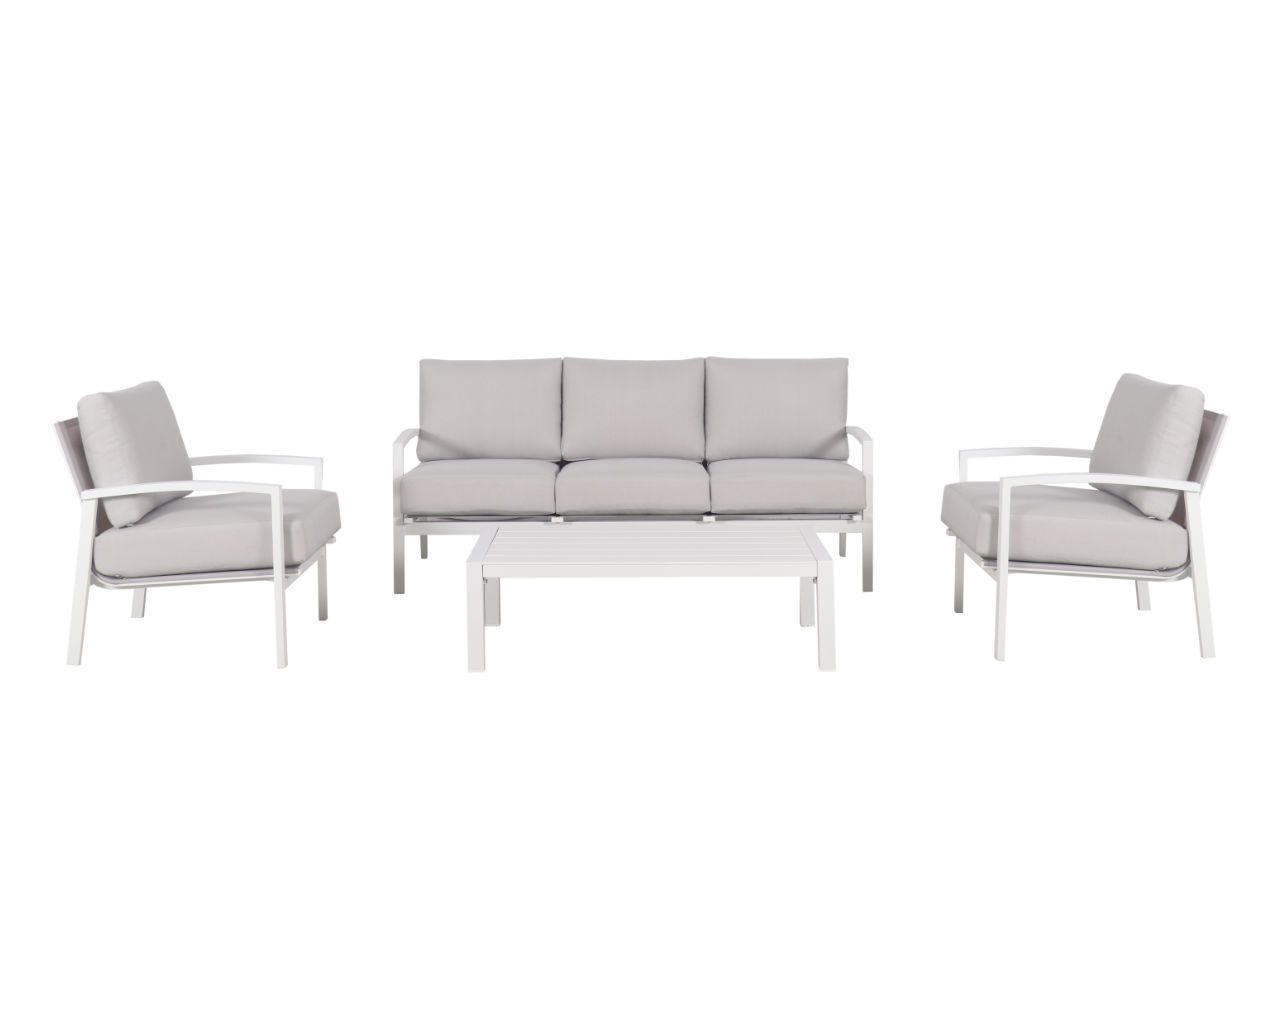 Jette 4 Piece Lounge Setting, White, small-swatch